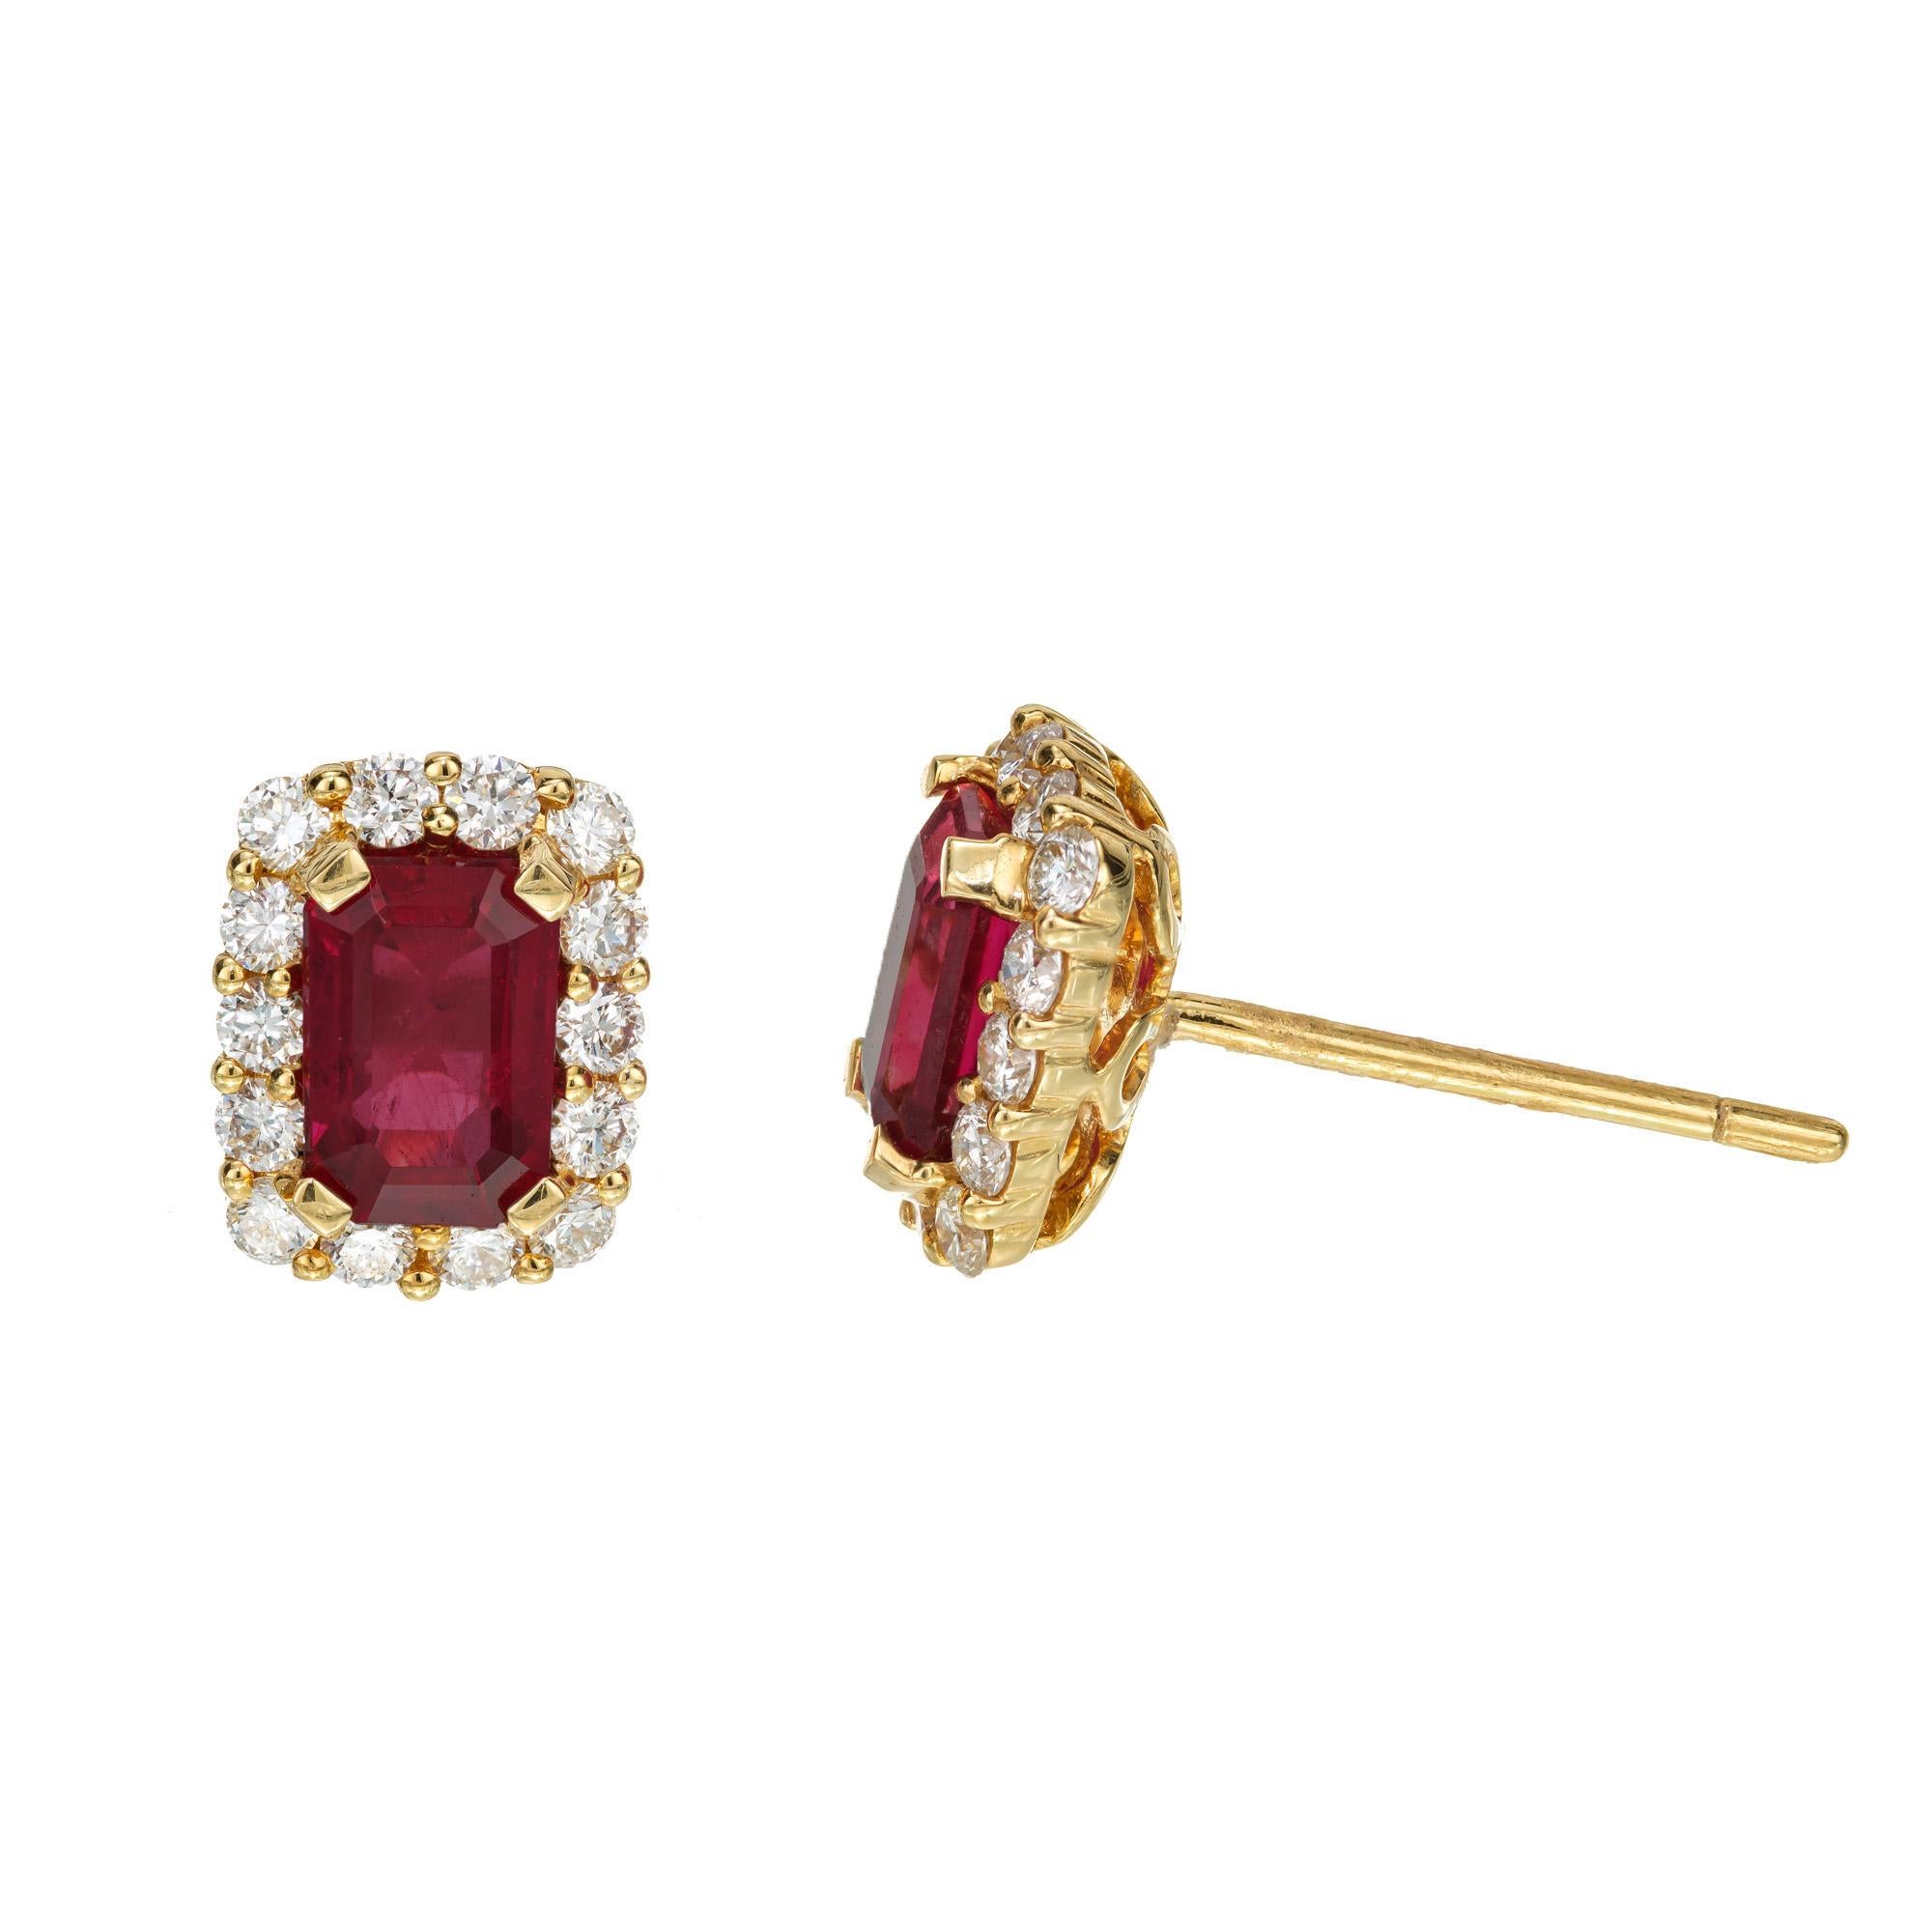 Octagon Cut Peter Suchy GIA Certified 1.44 Carat Ruby Diamond Halo Yellow Gold Earrings